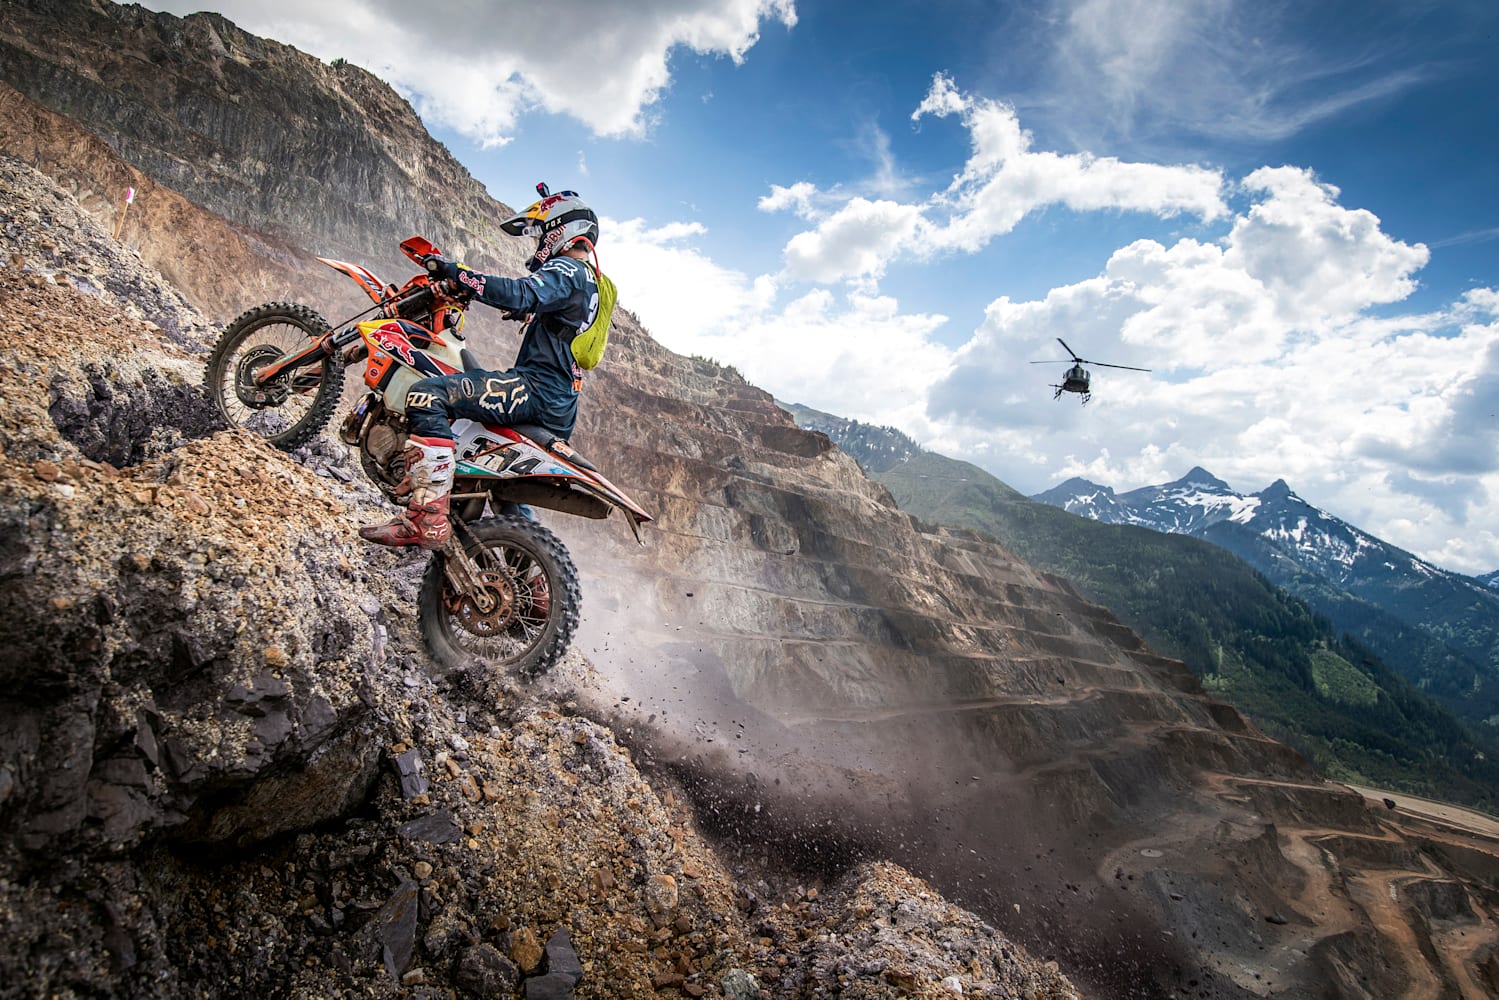 Best Hard Enduro videos to watch on Red Bull TV